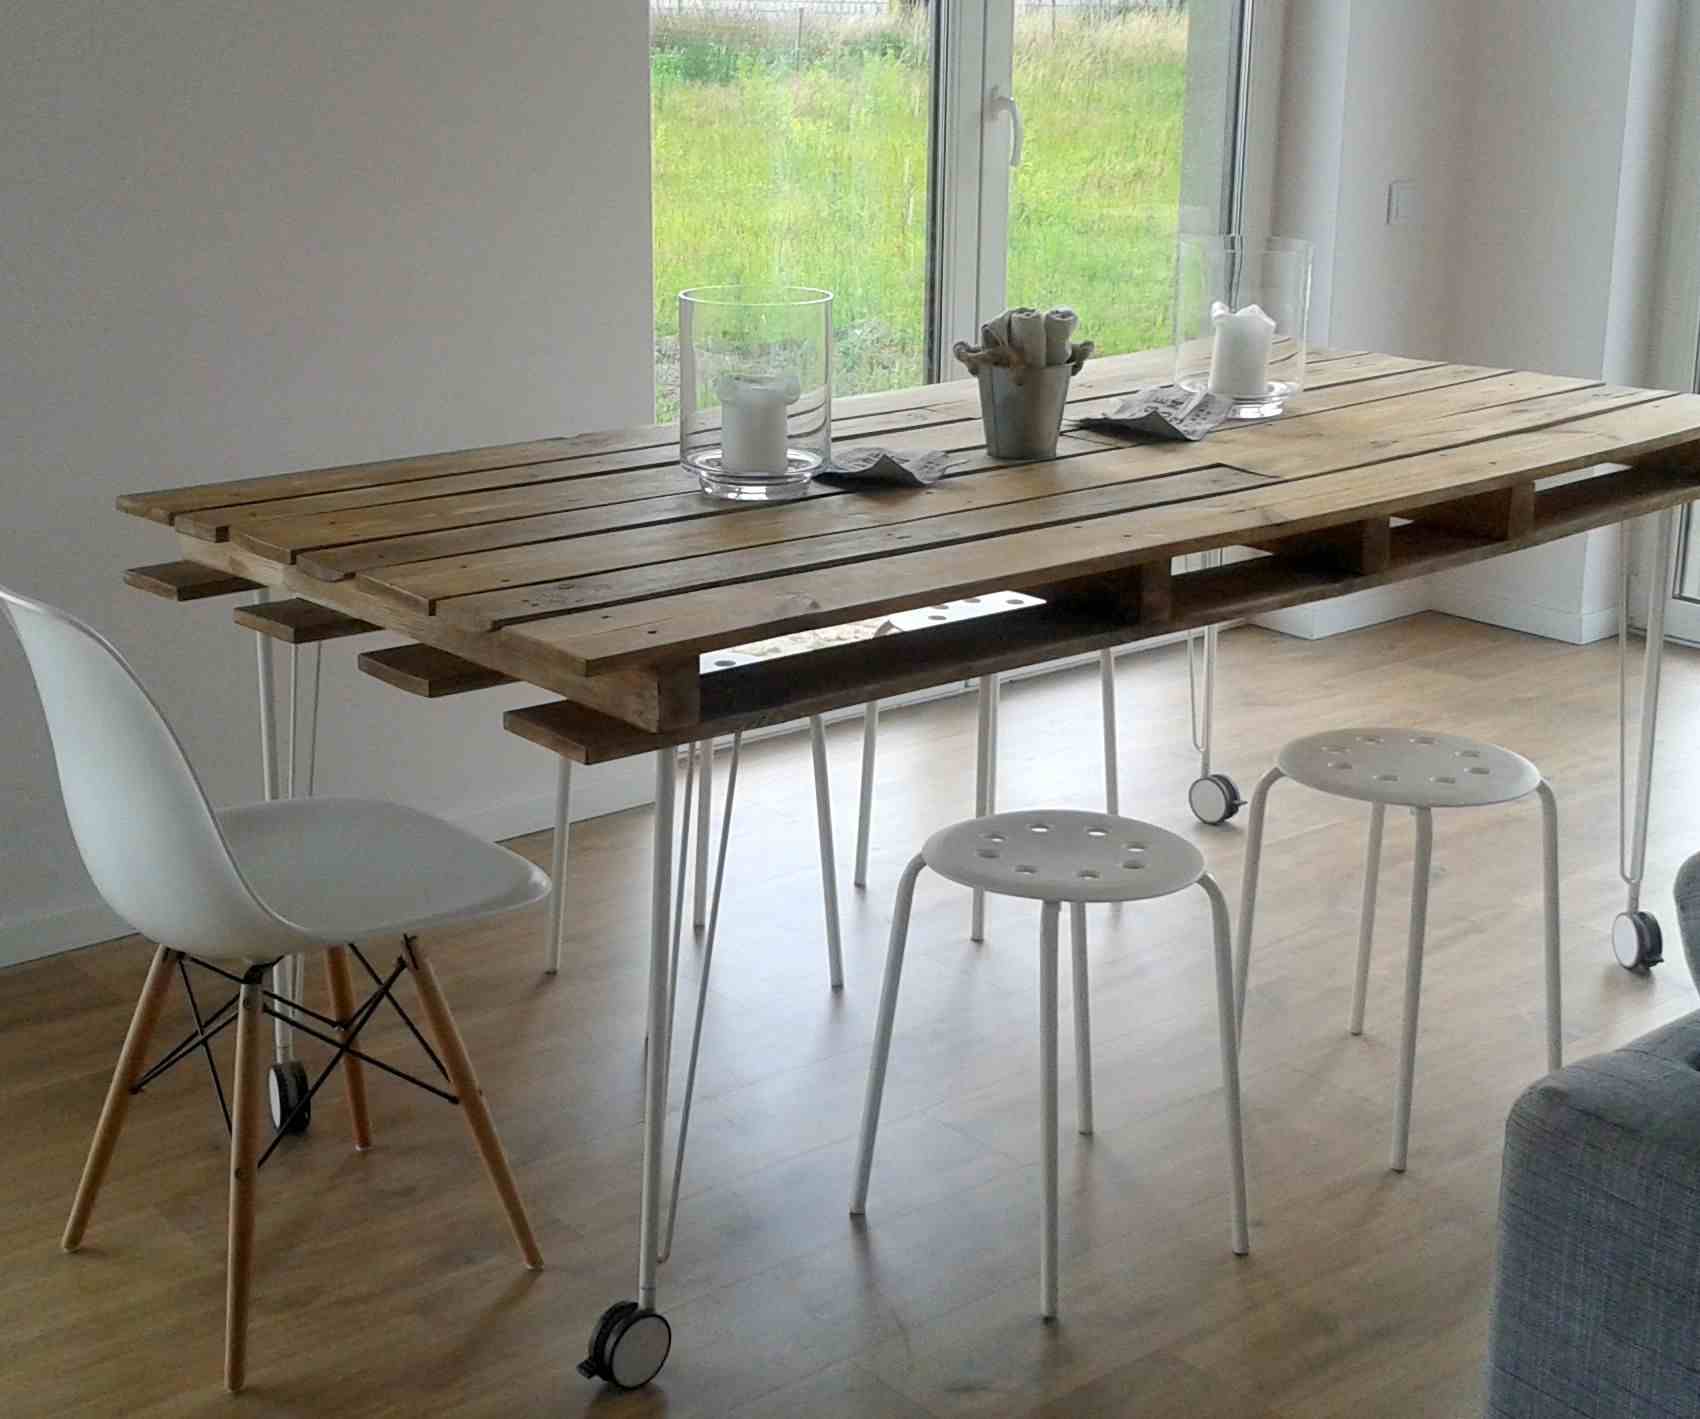 Wooden Pallets Furniture Diy Ideas A, How To Make A Dining Room Table From Pallets